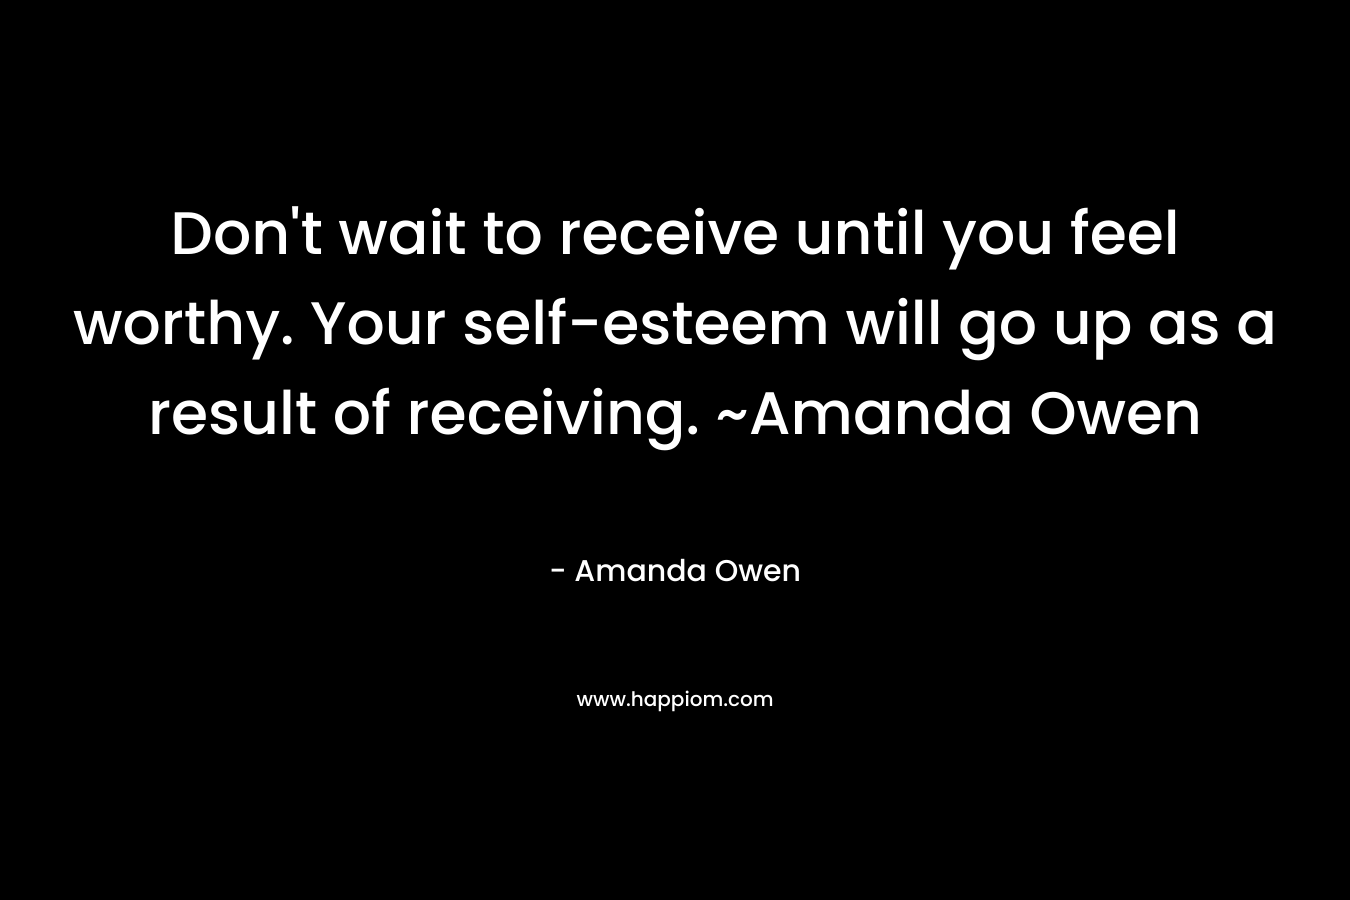 Don't wait to receive until you feel worthy. Your self-esteem will go up as a result of receiving. ~Amanda Owen